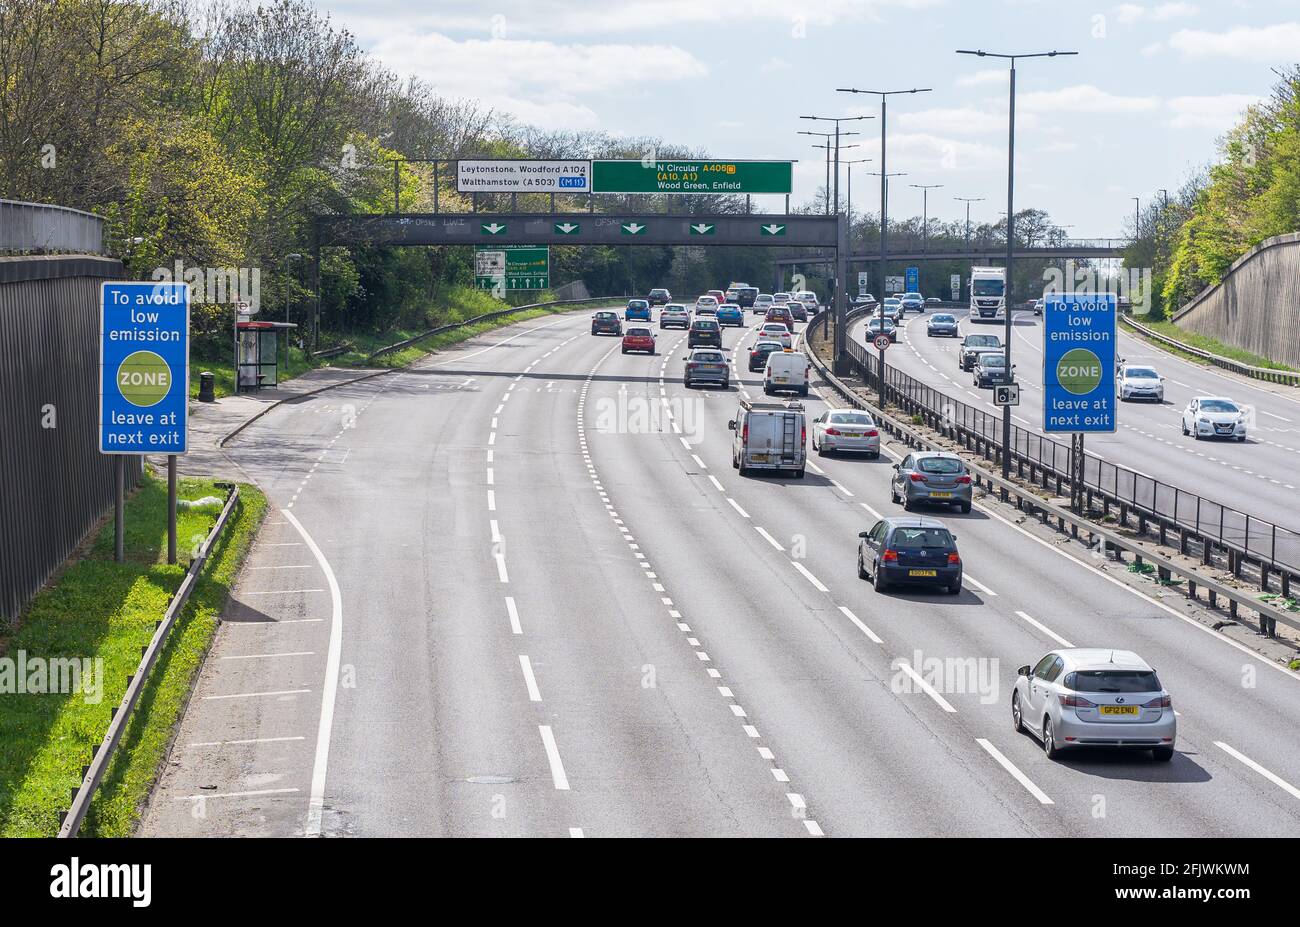 Ultra Low Emission Zone warning sign on the A406 dual carriageway in South Woodford. London Stock Photo